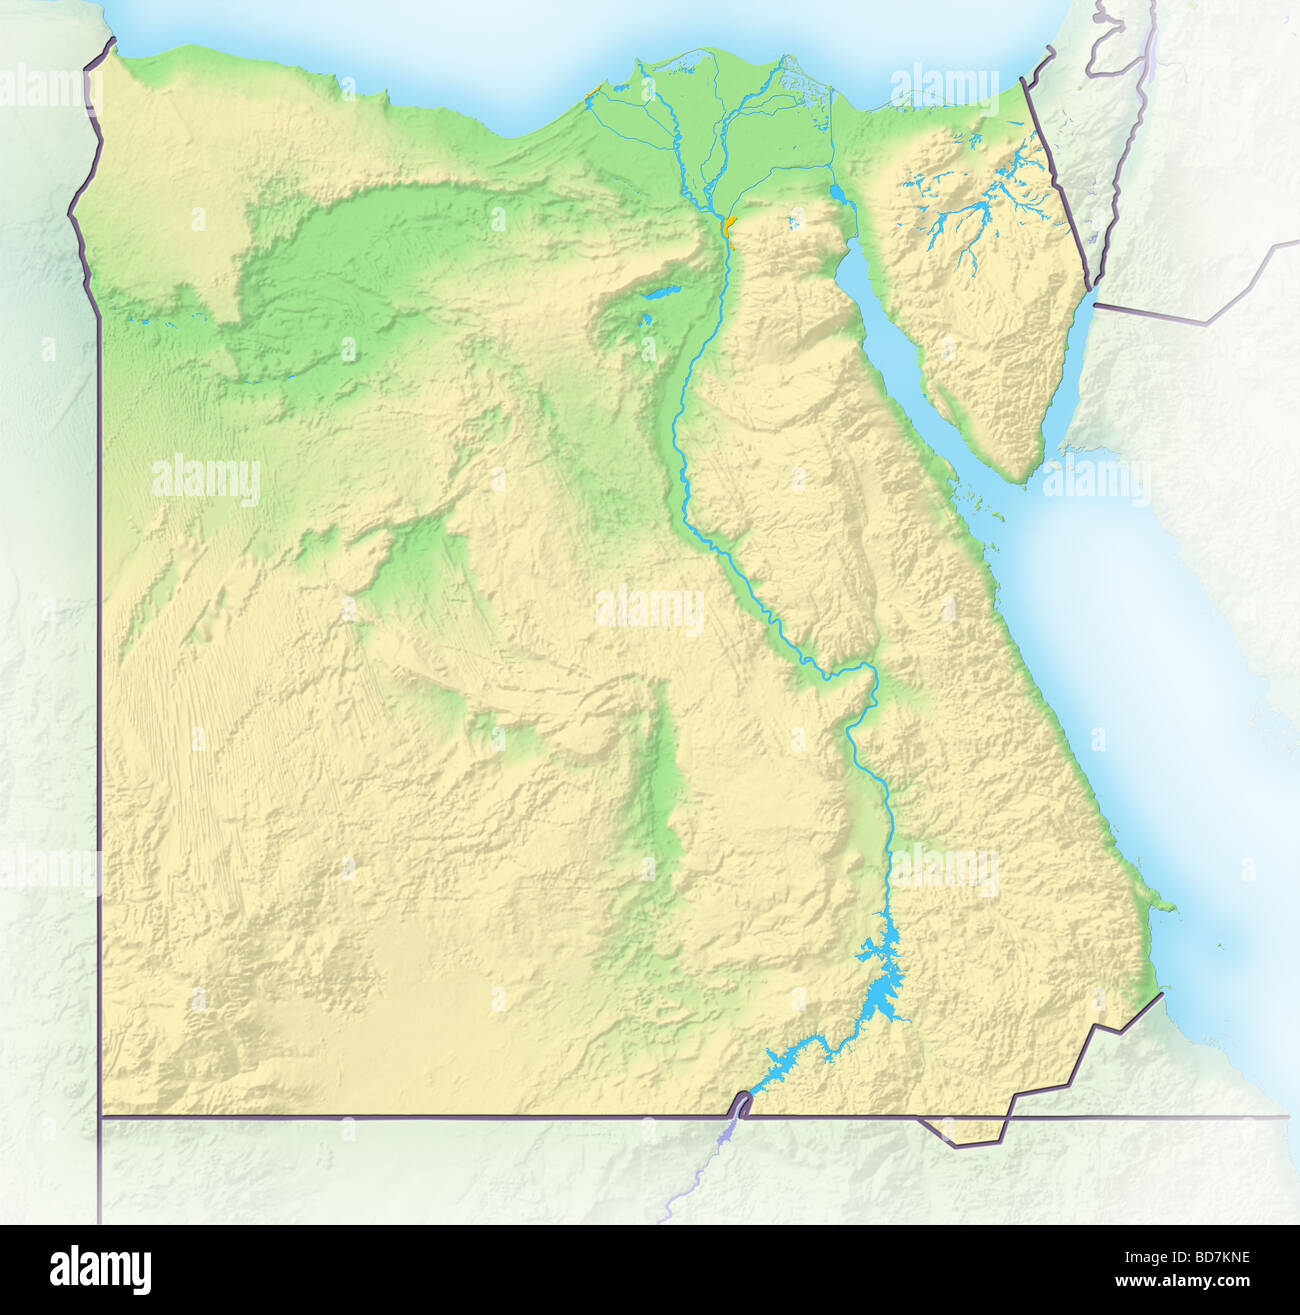 Egypt, shaded relief map. Stock Photo